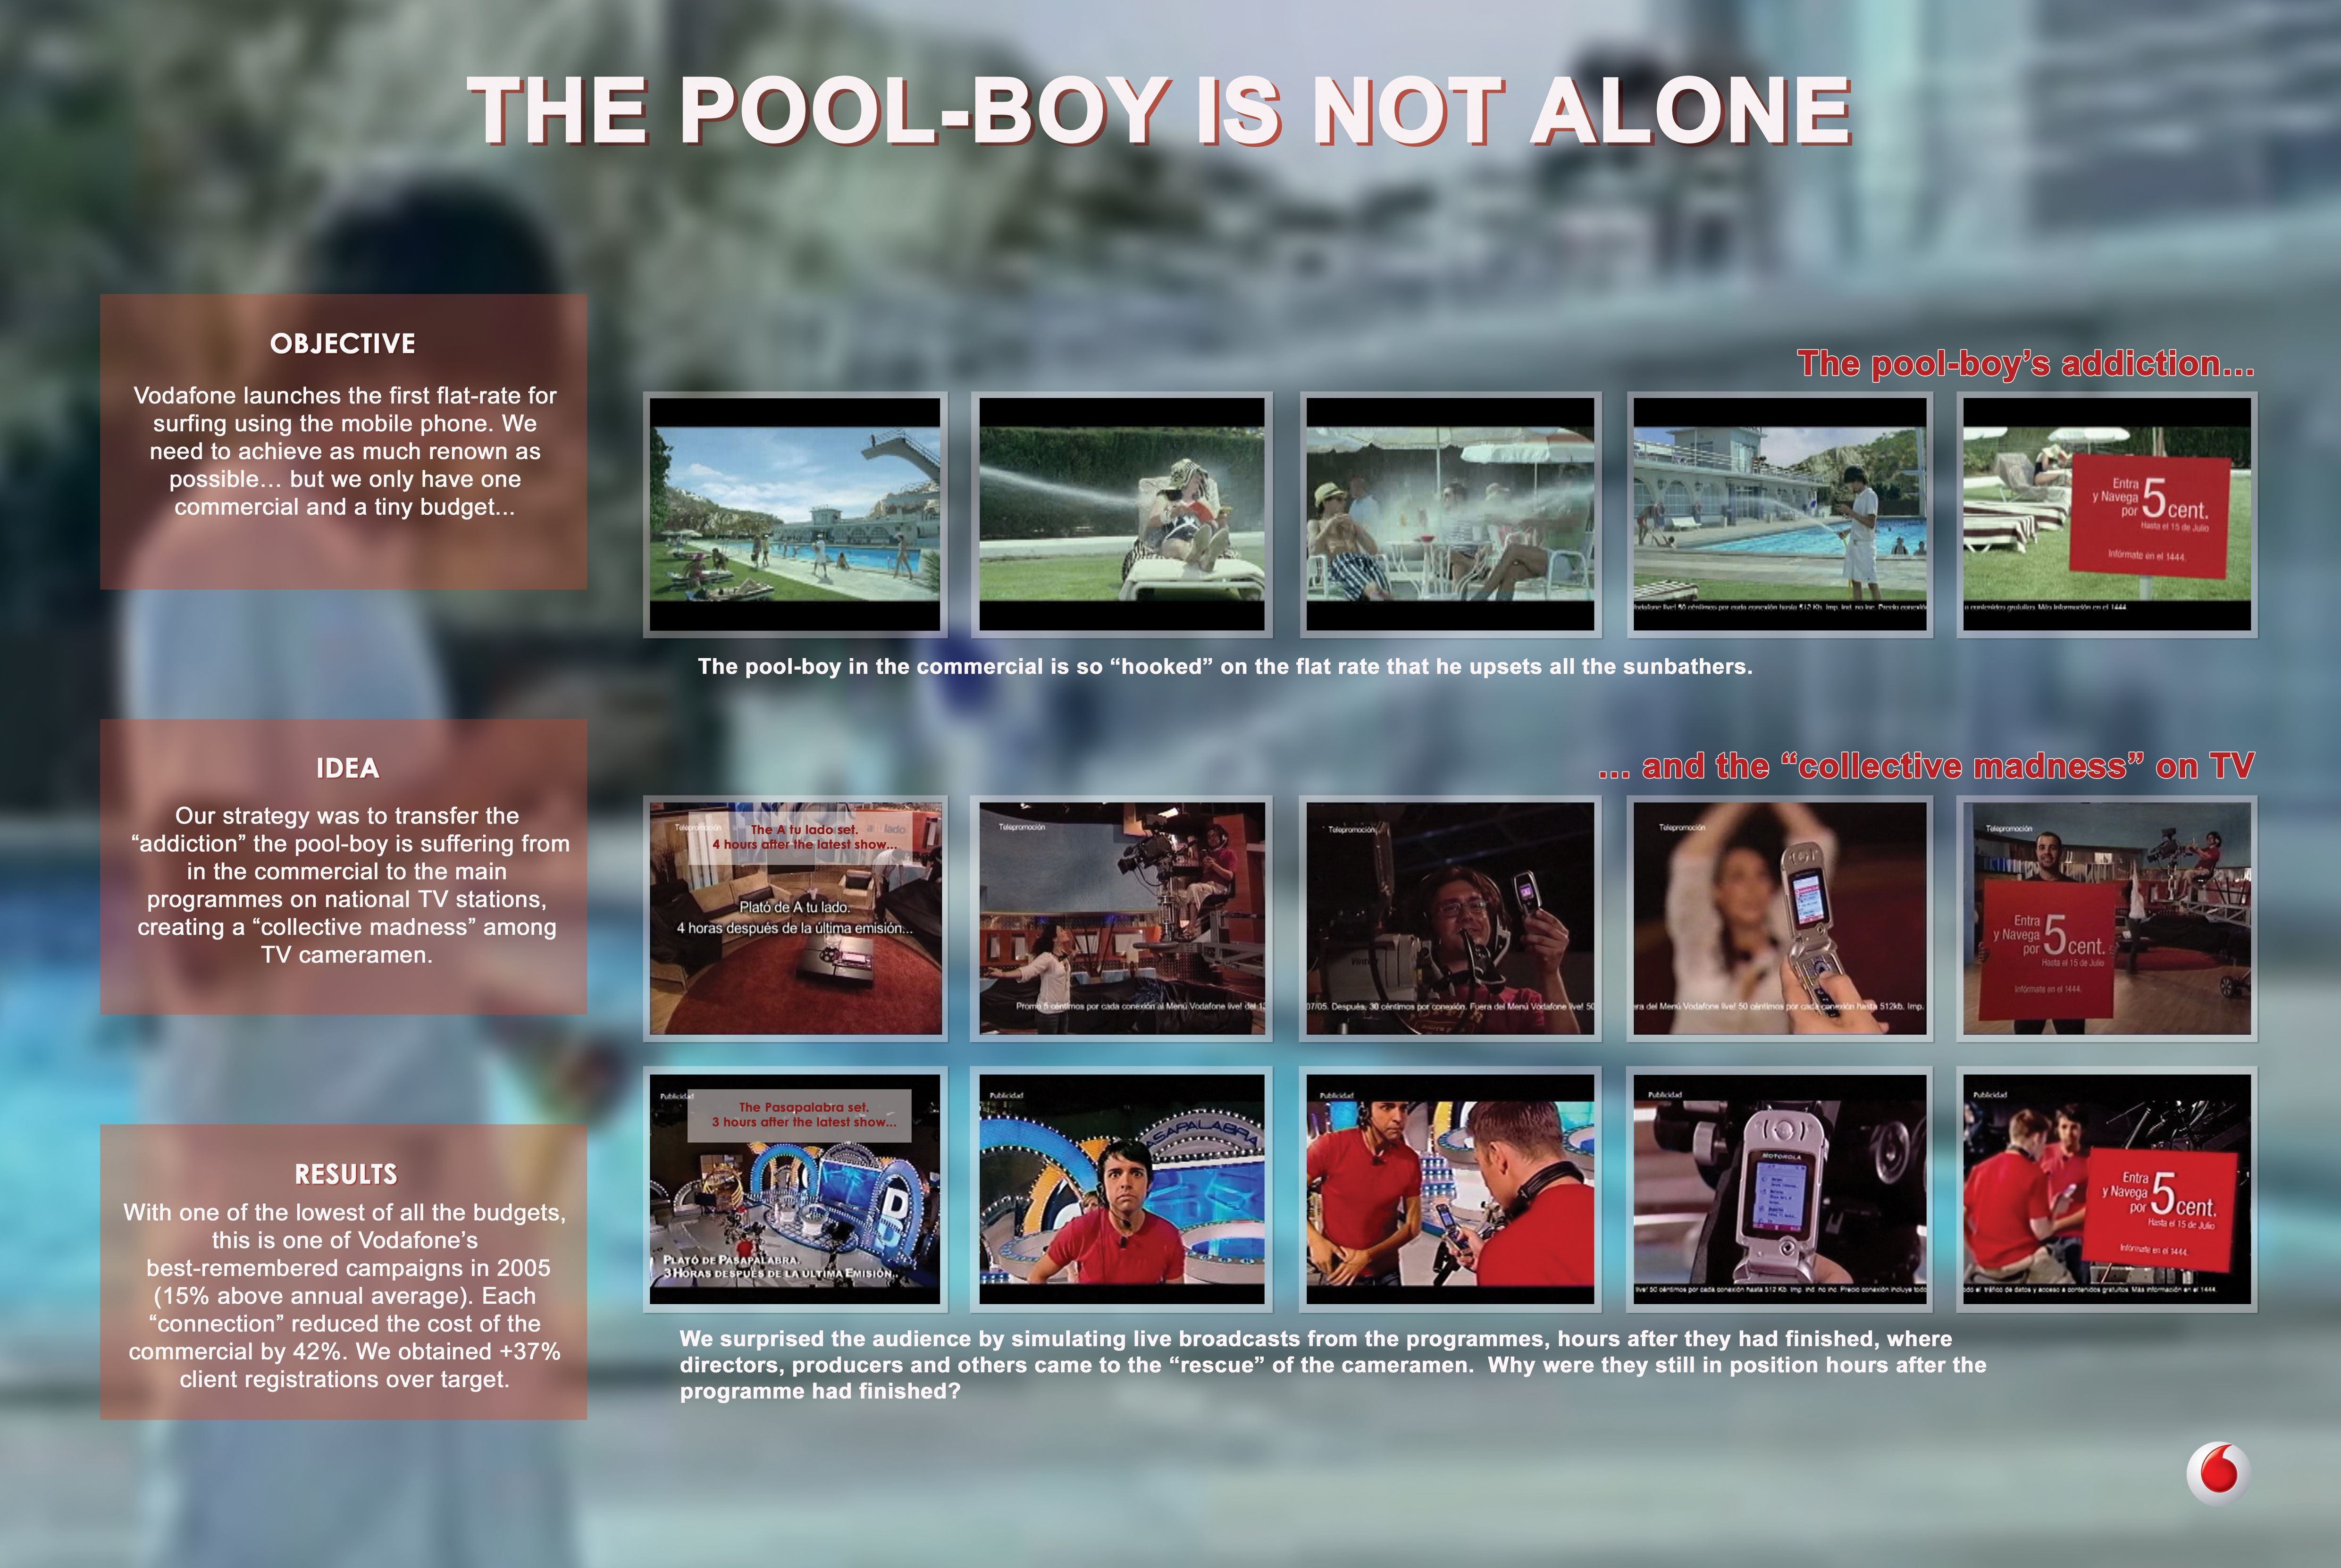 THE POOL-BOY IS NOT ALONE